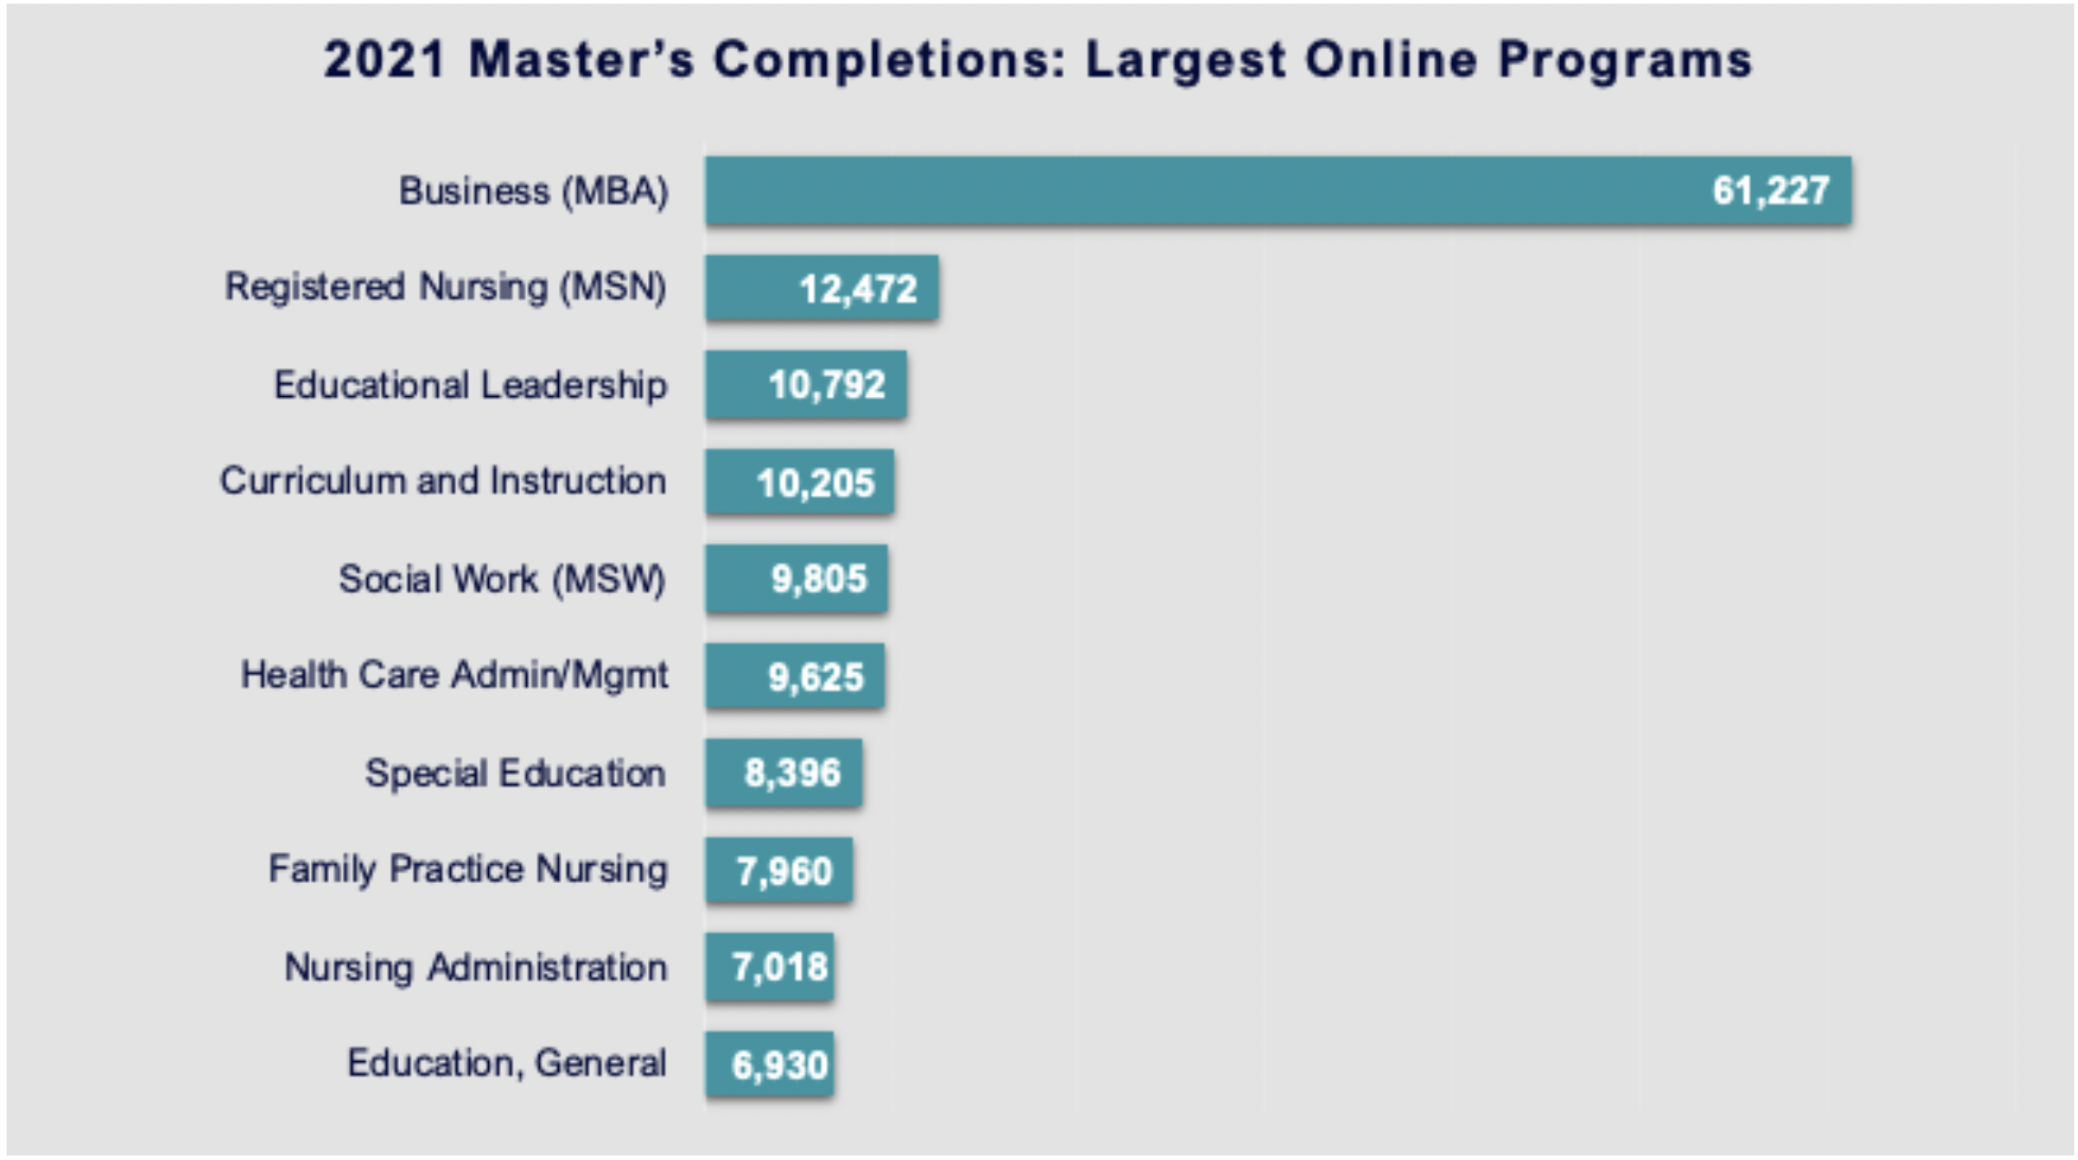 2021 Master's Completions: Largest Online Programs